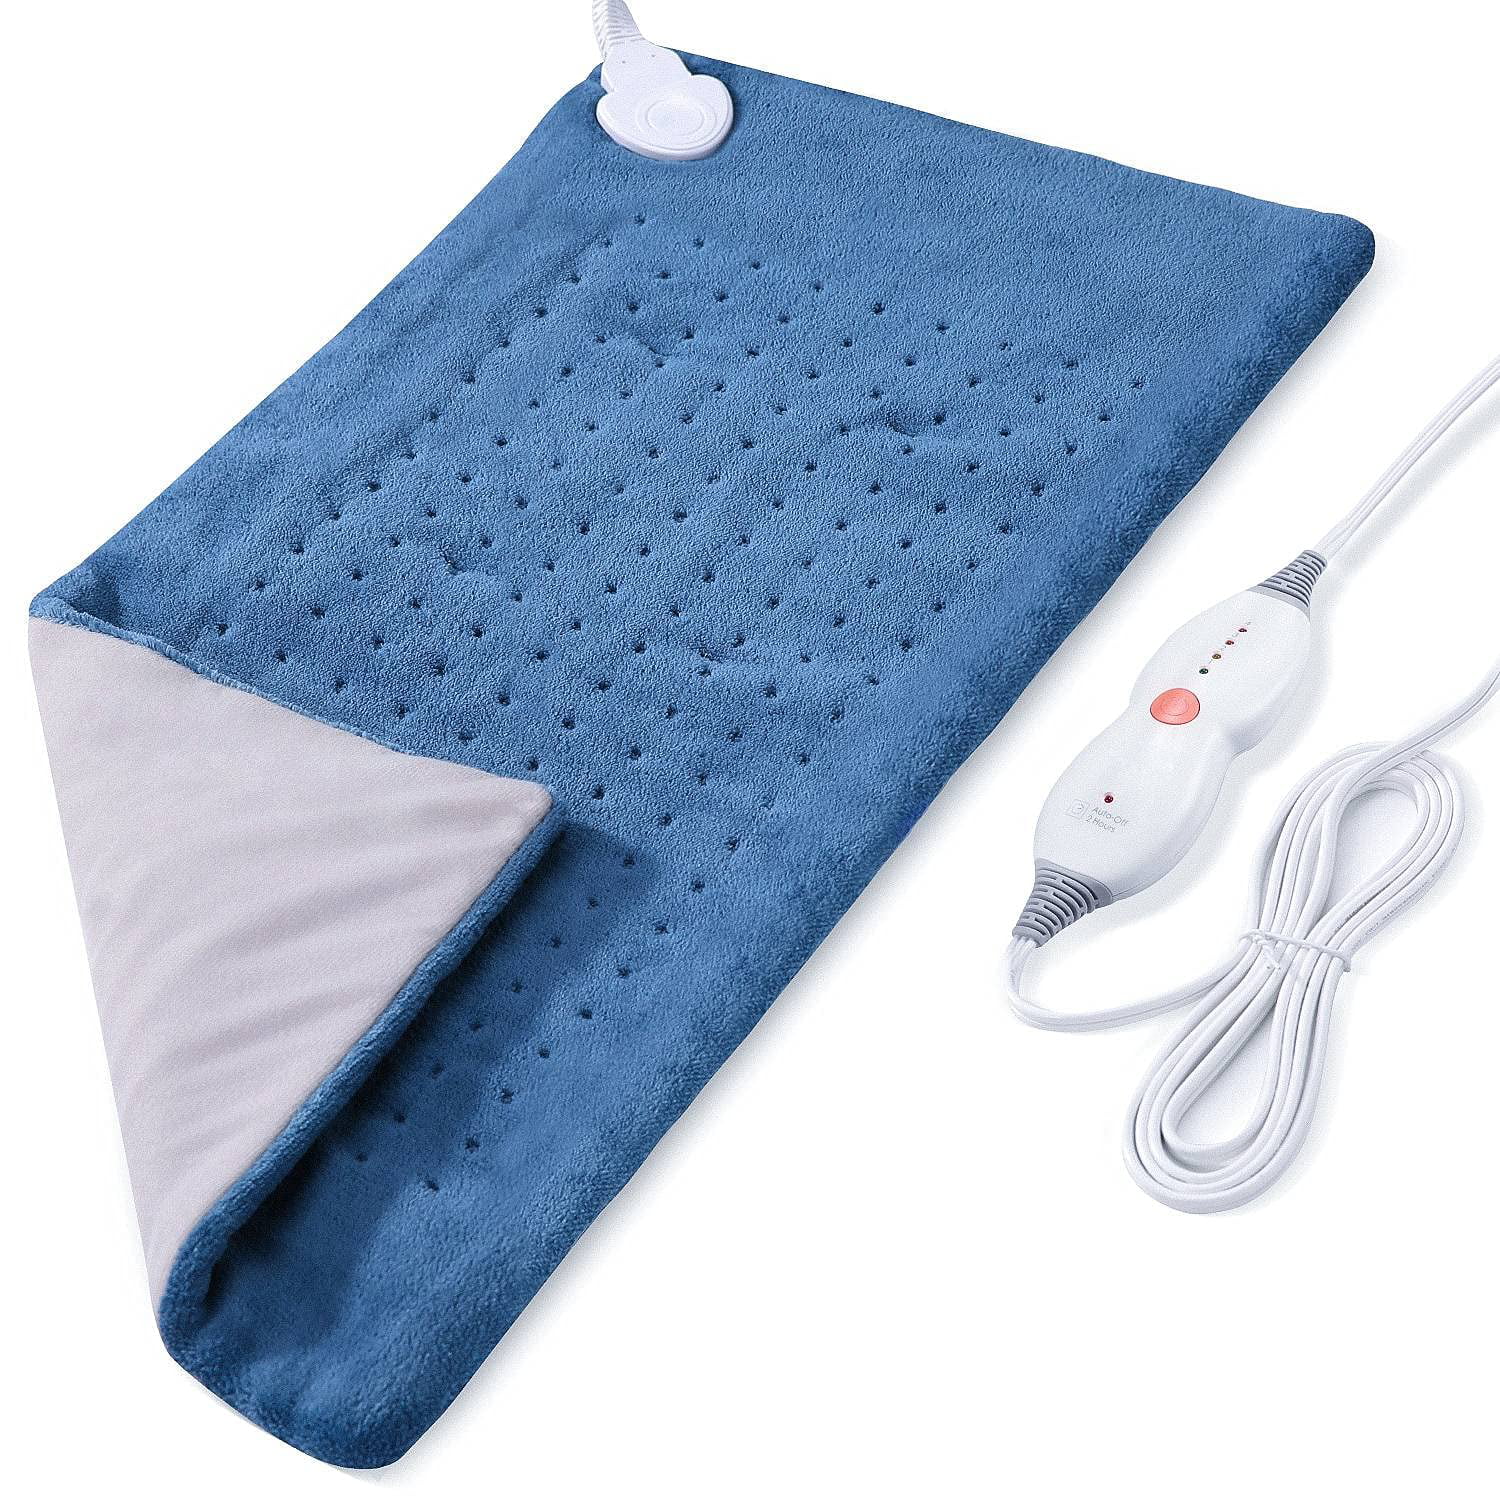 Details about   Calming Heat Weighted Heating Pad by CURE CHOICE 12x24 As seen on TV 